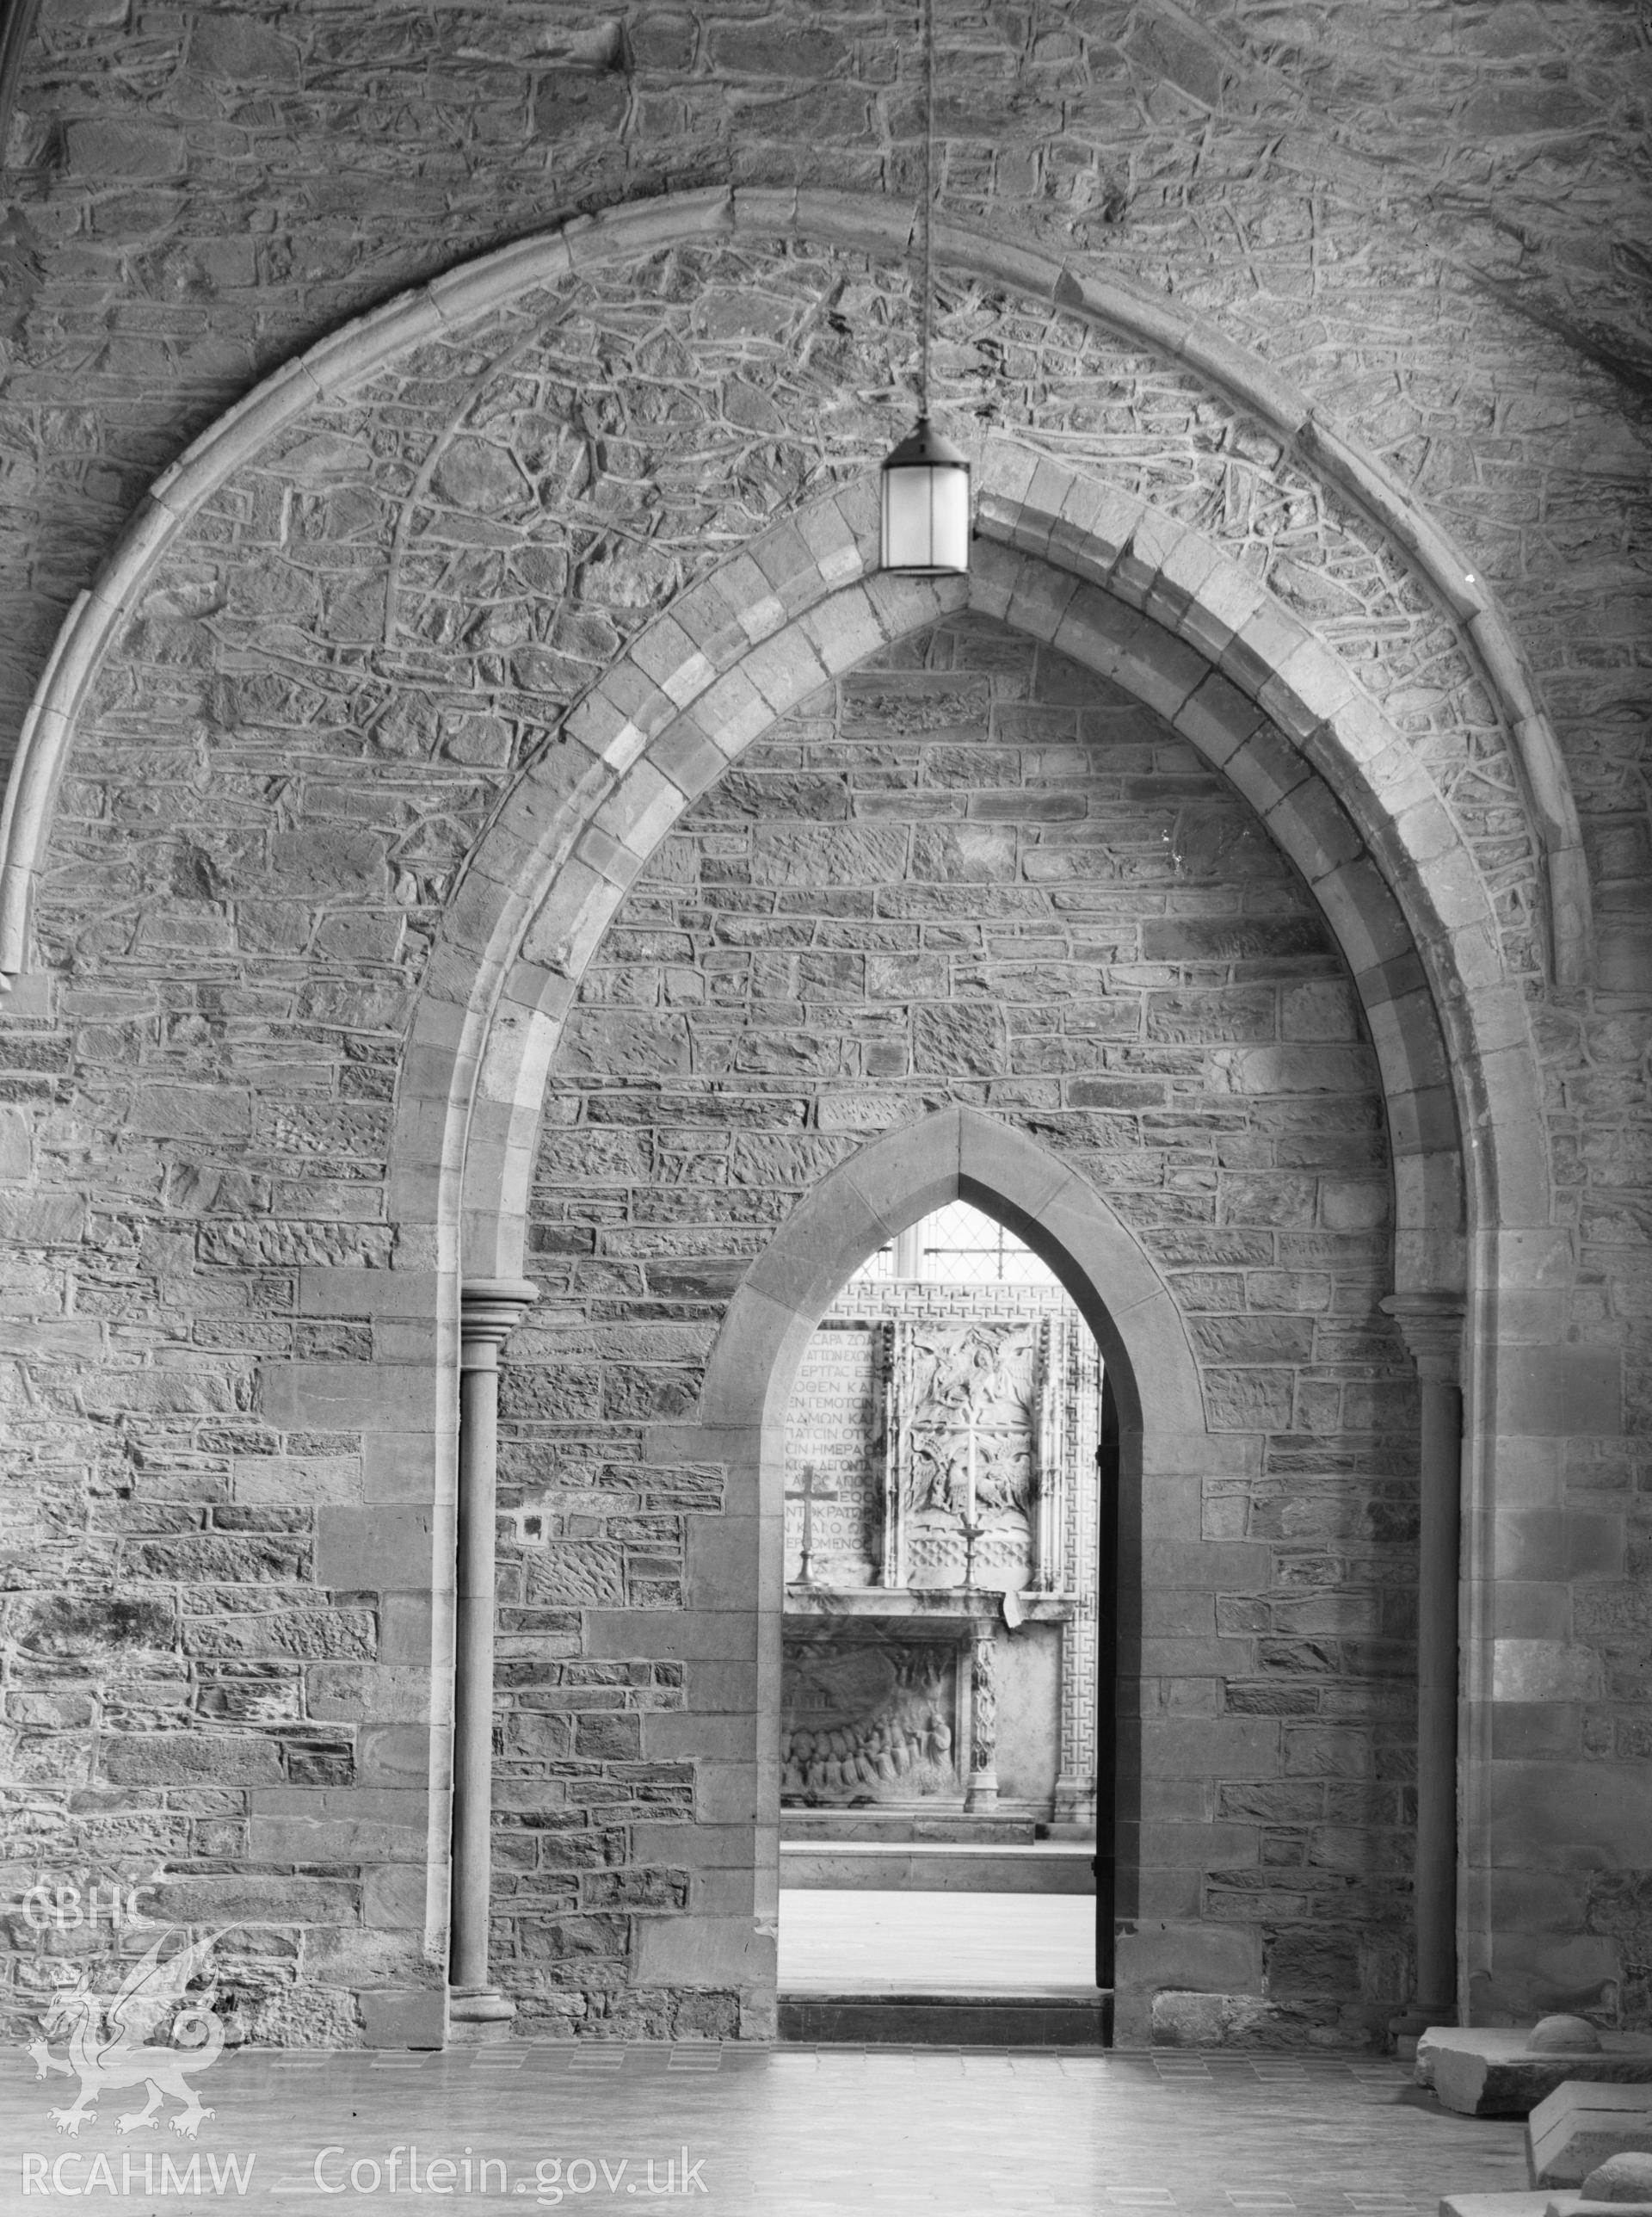 Digital copy of a black and white nitrate negative showing detail of interior archway at St. David's Cathedral, taken by E.W. Lovegrove, July 1936.